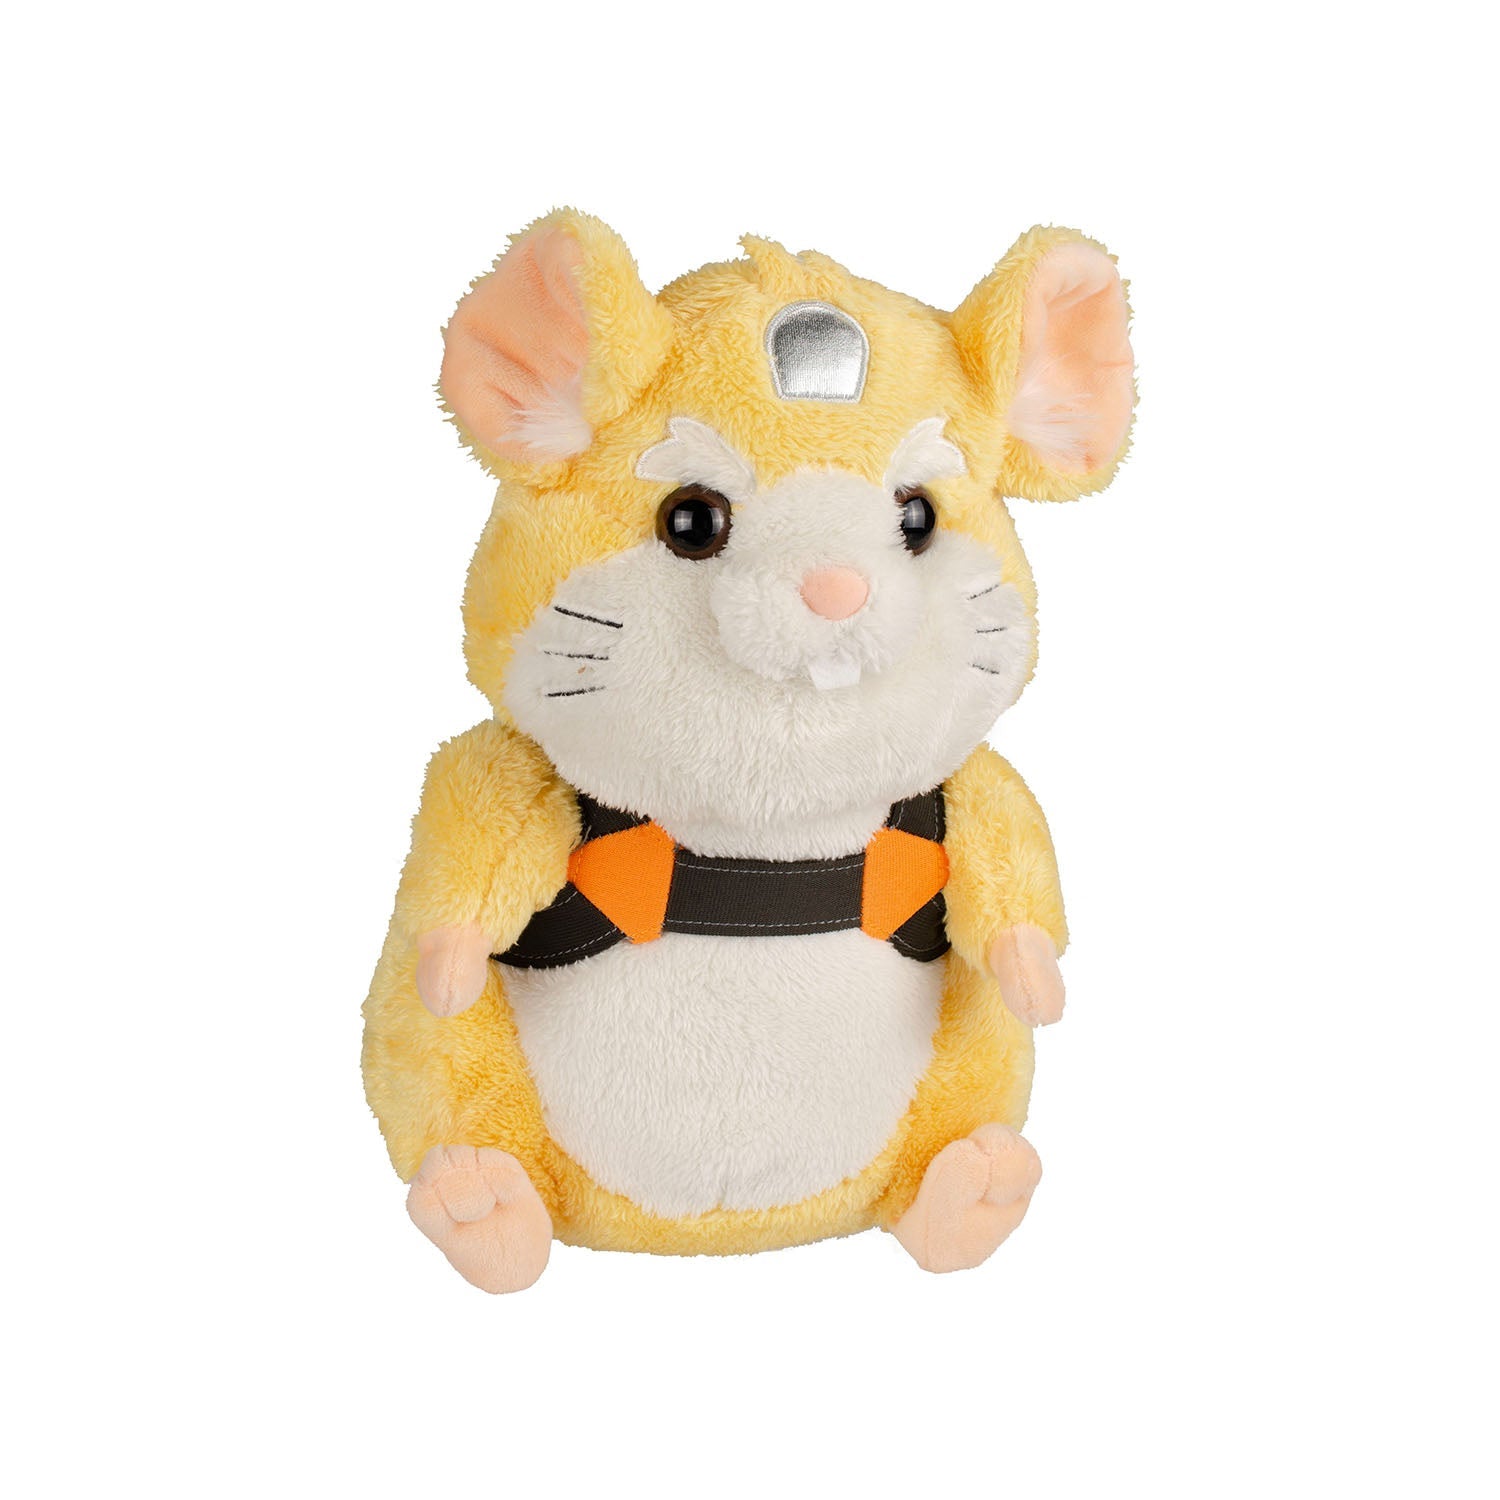 Overwatch Wrecking Ball Plush Toy in Tan - Front View